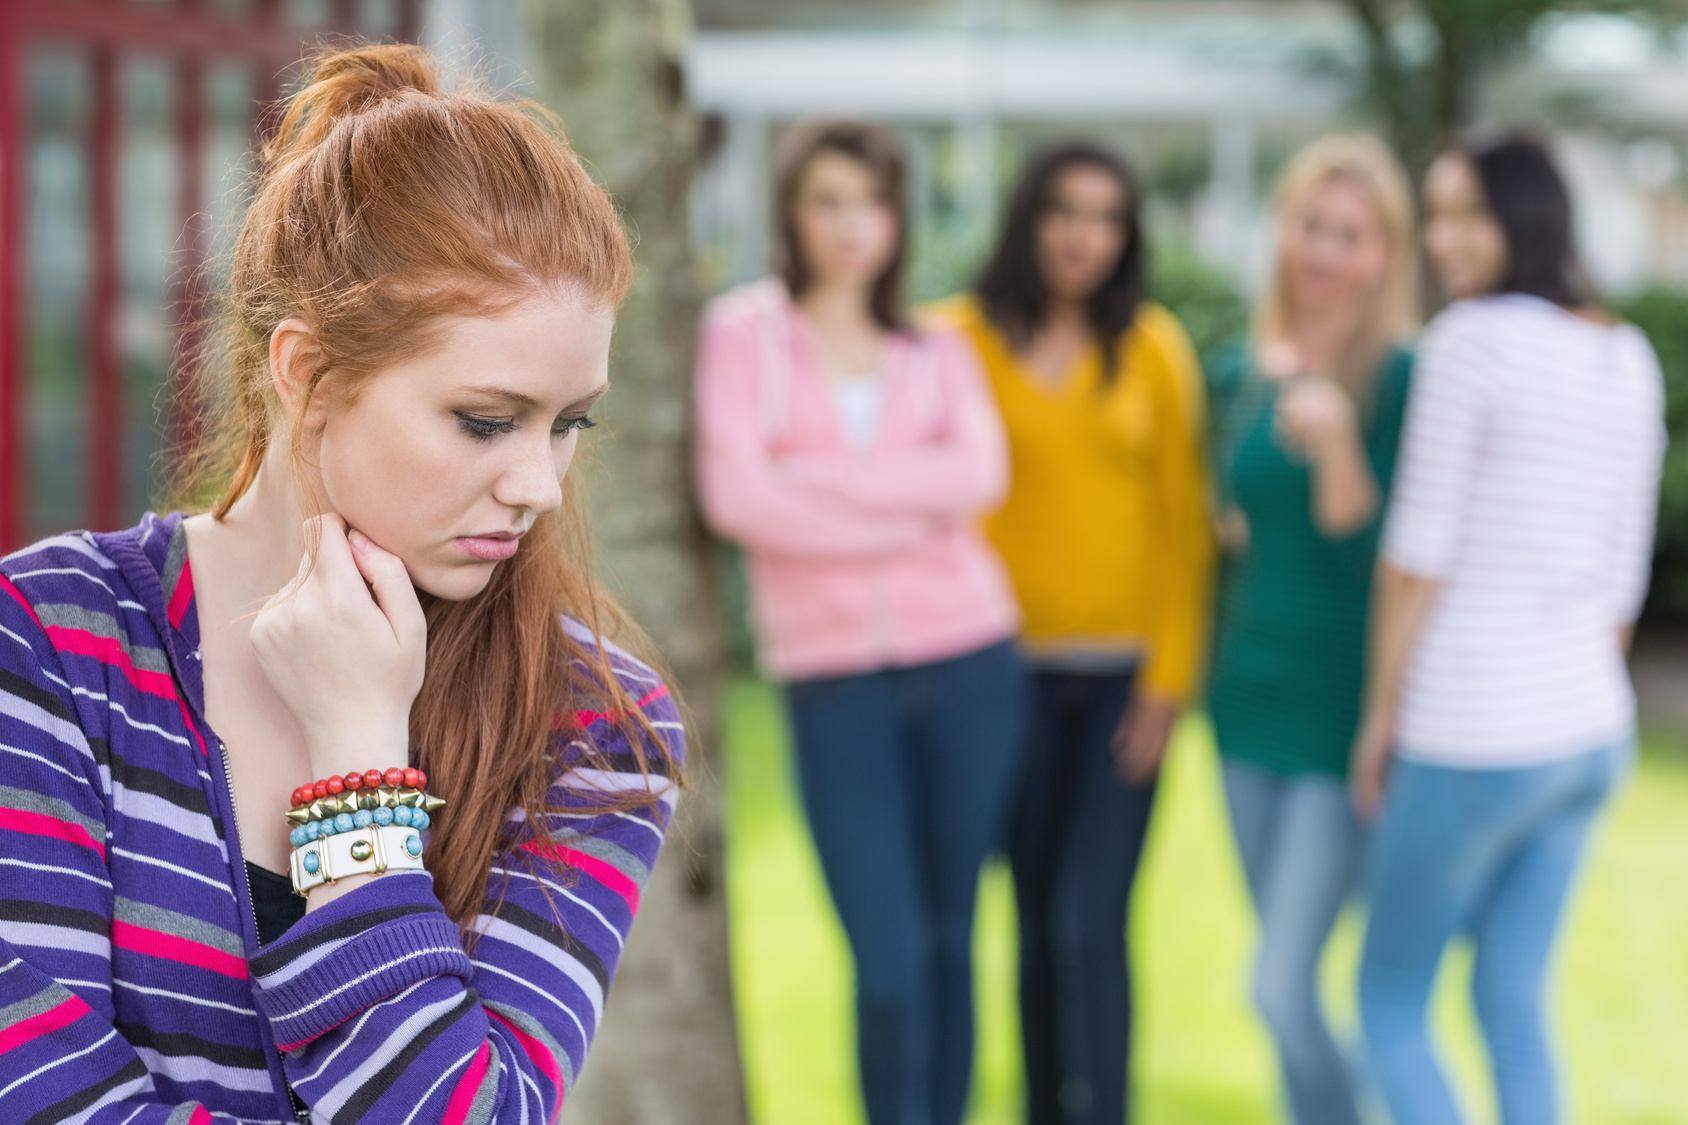 Female student being bullied by other group of students